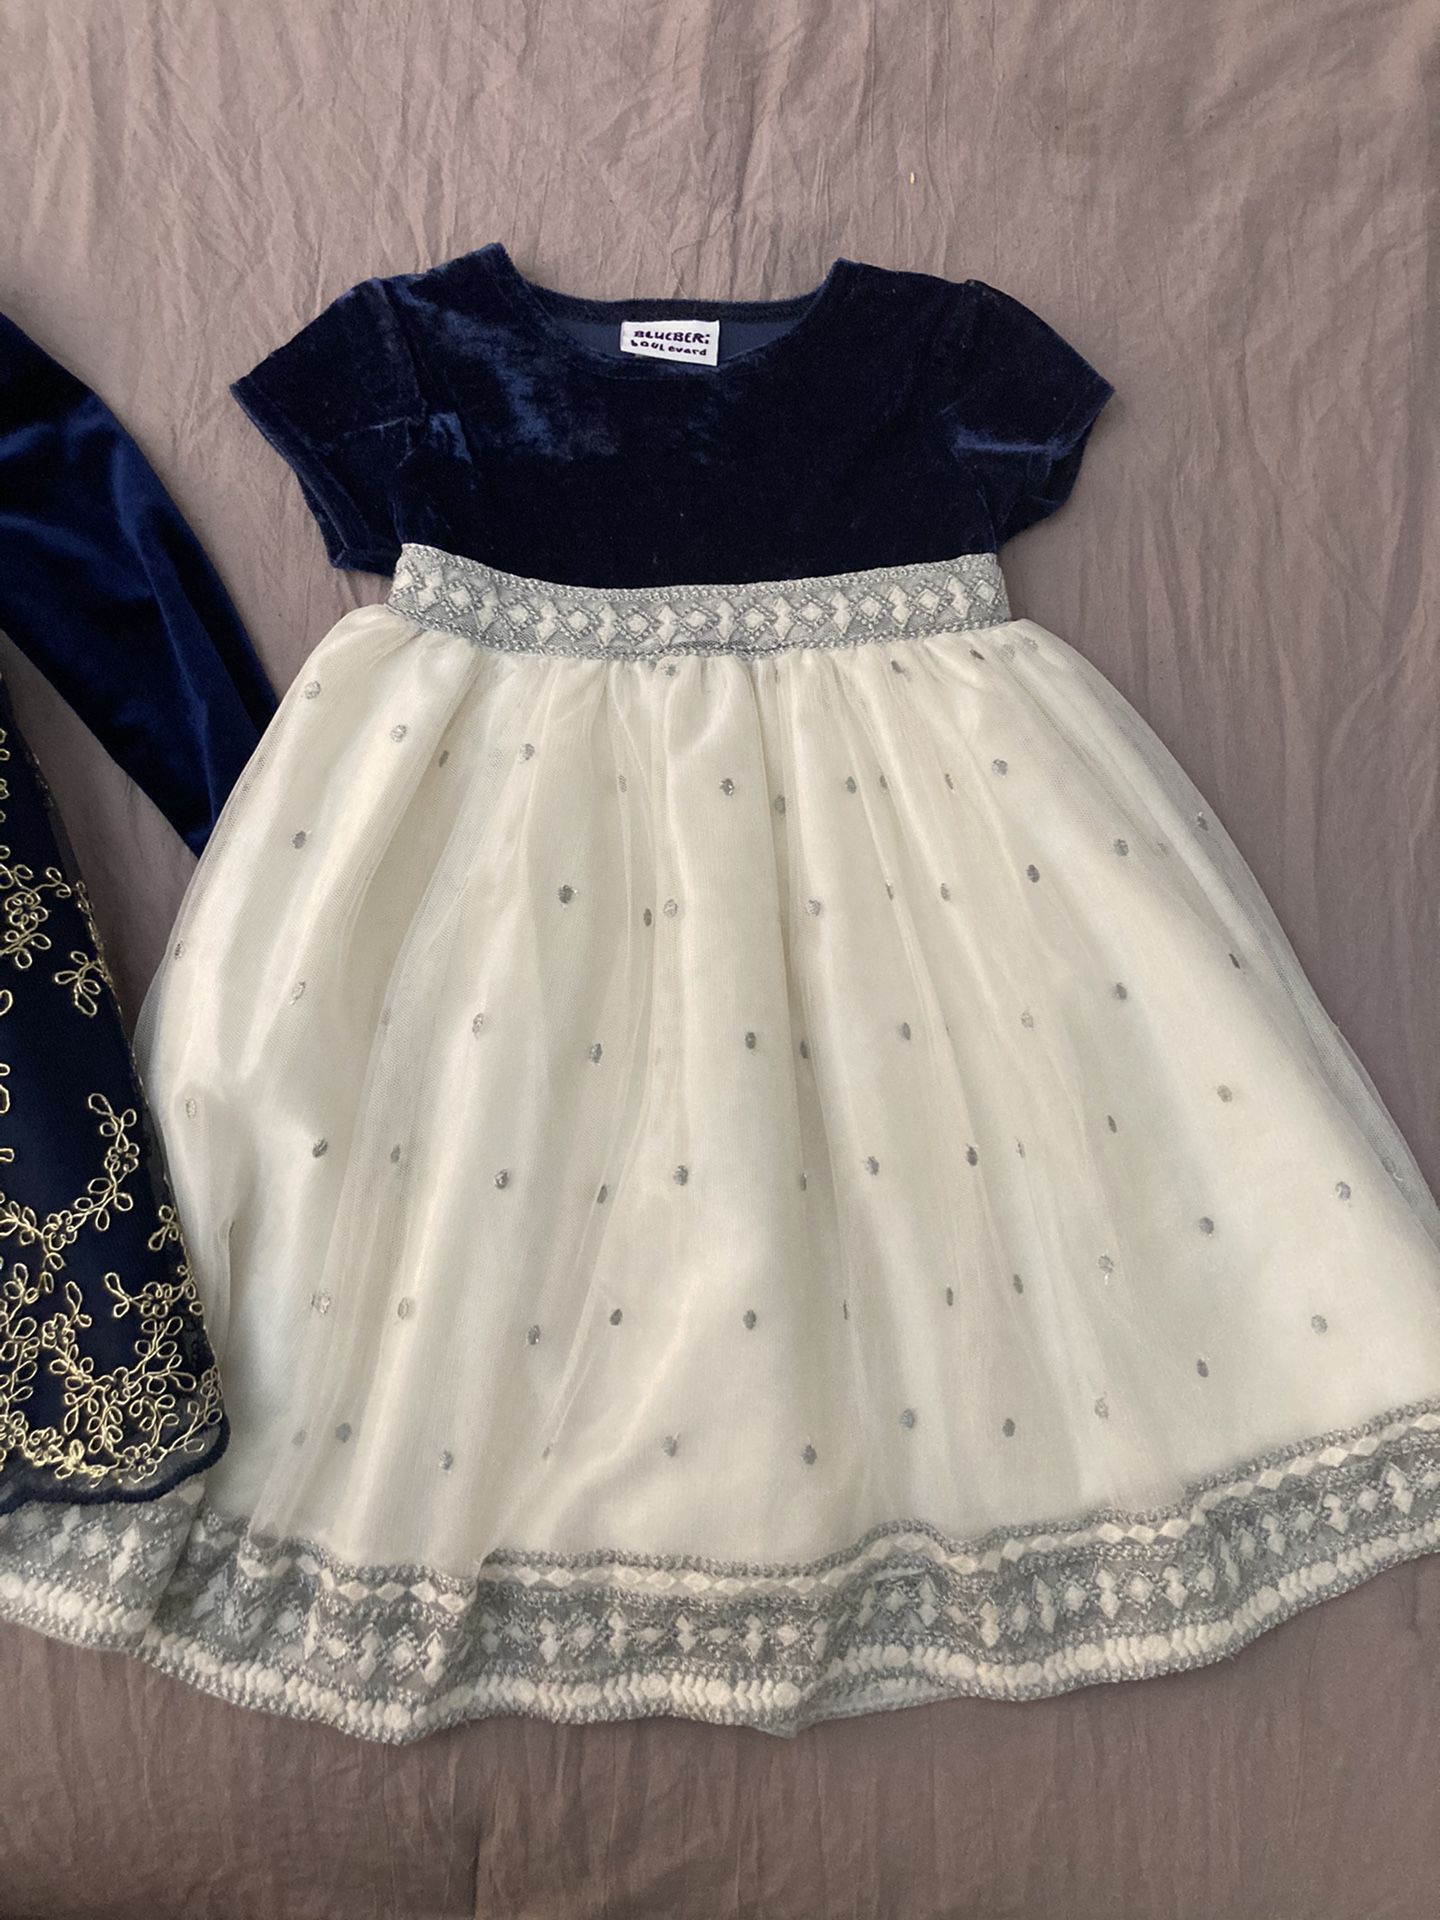 Baby/ Toddler Girl Clothes And Shoes